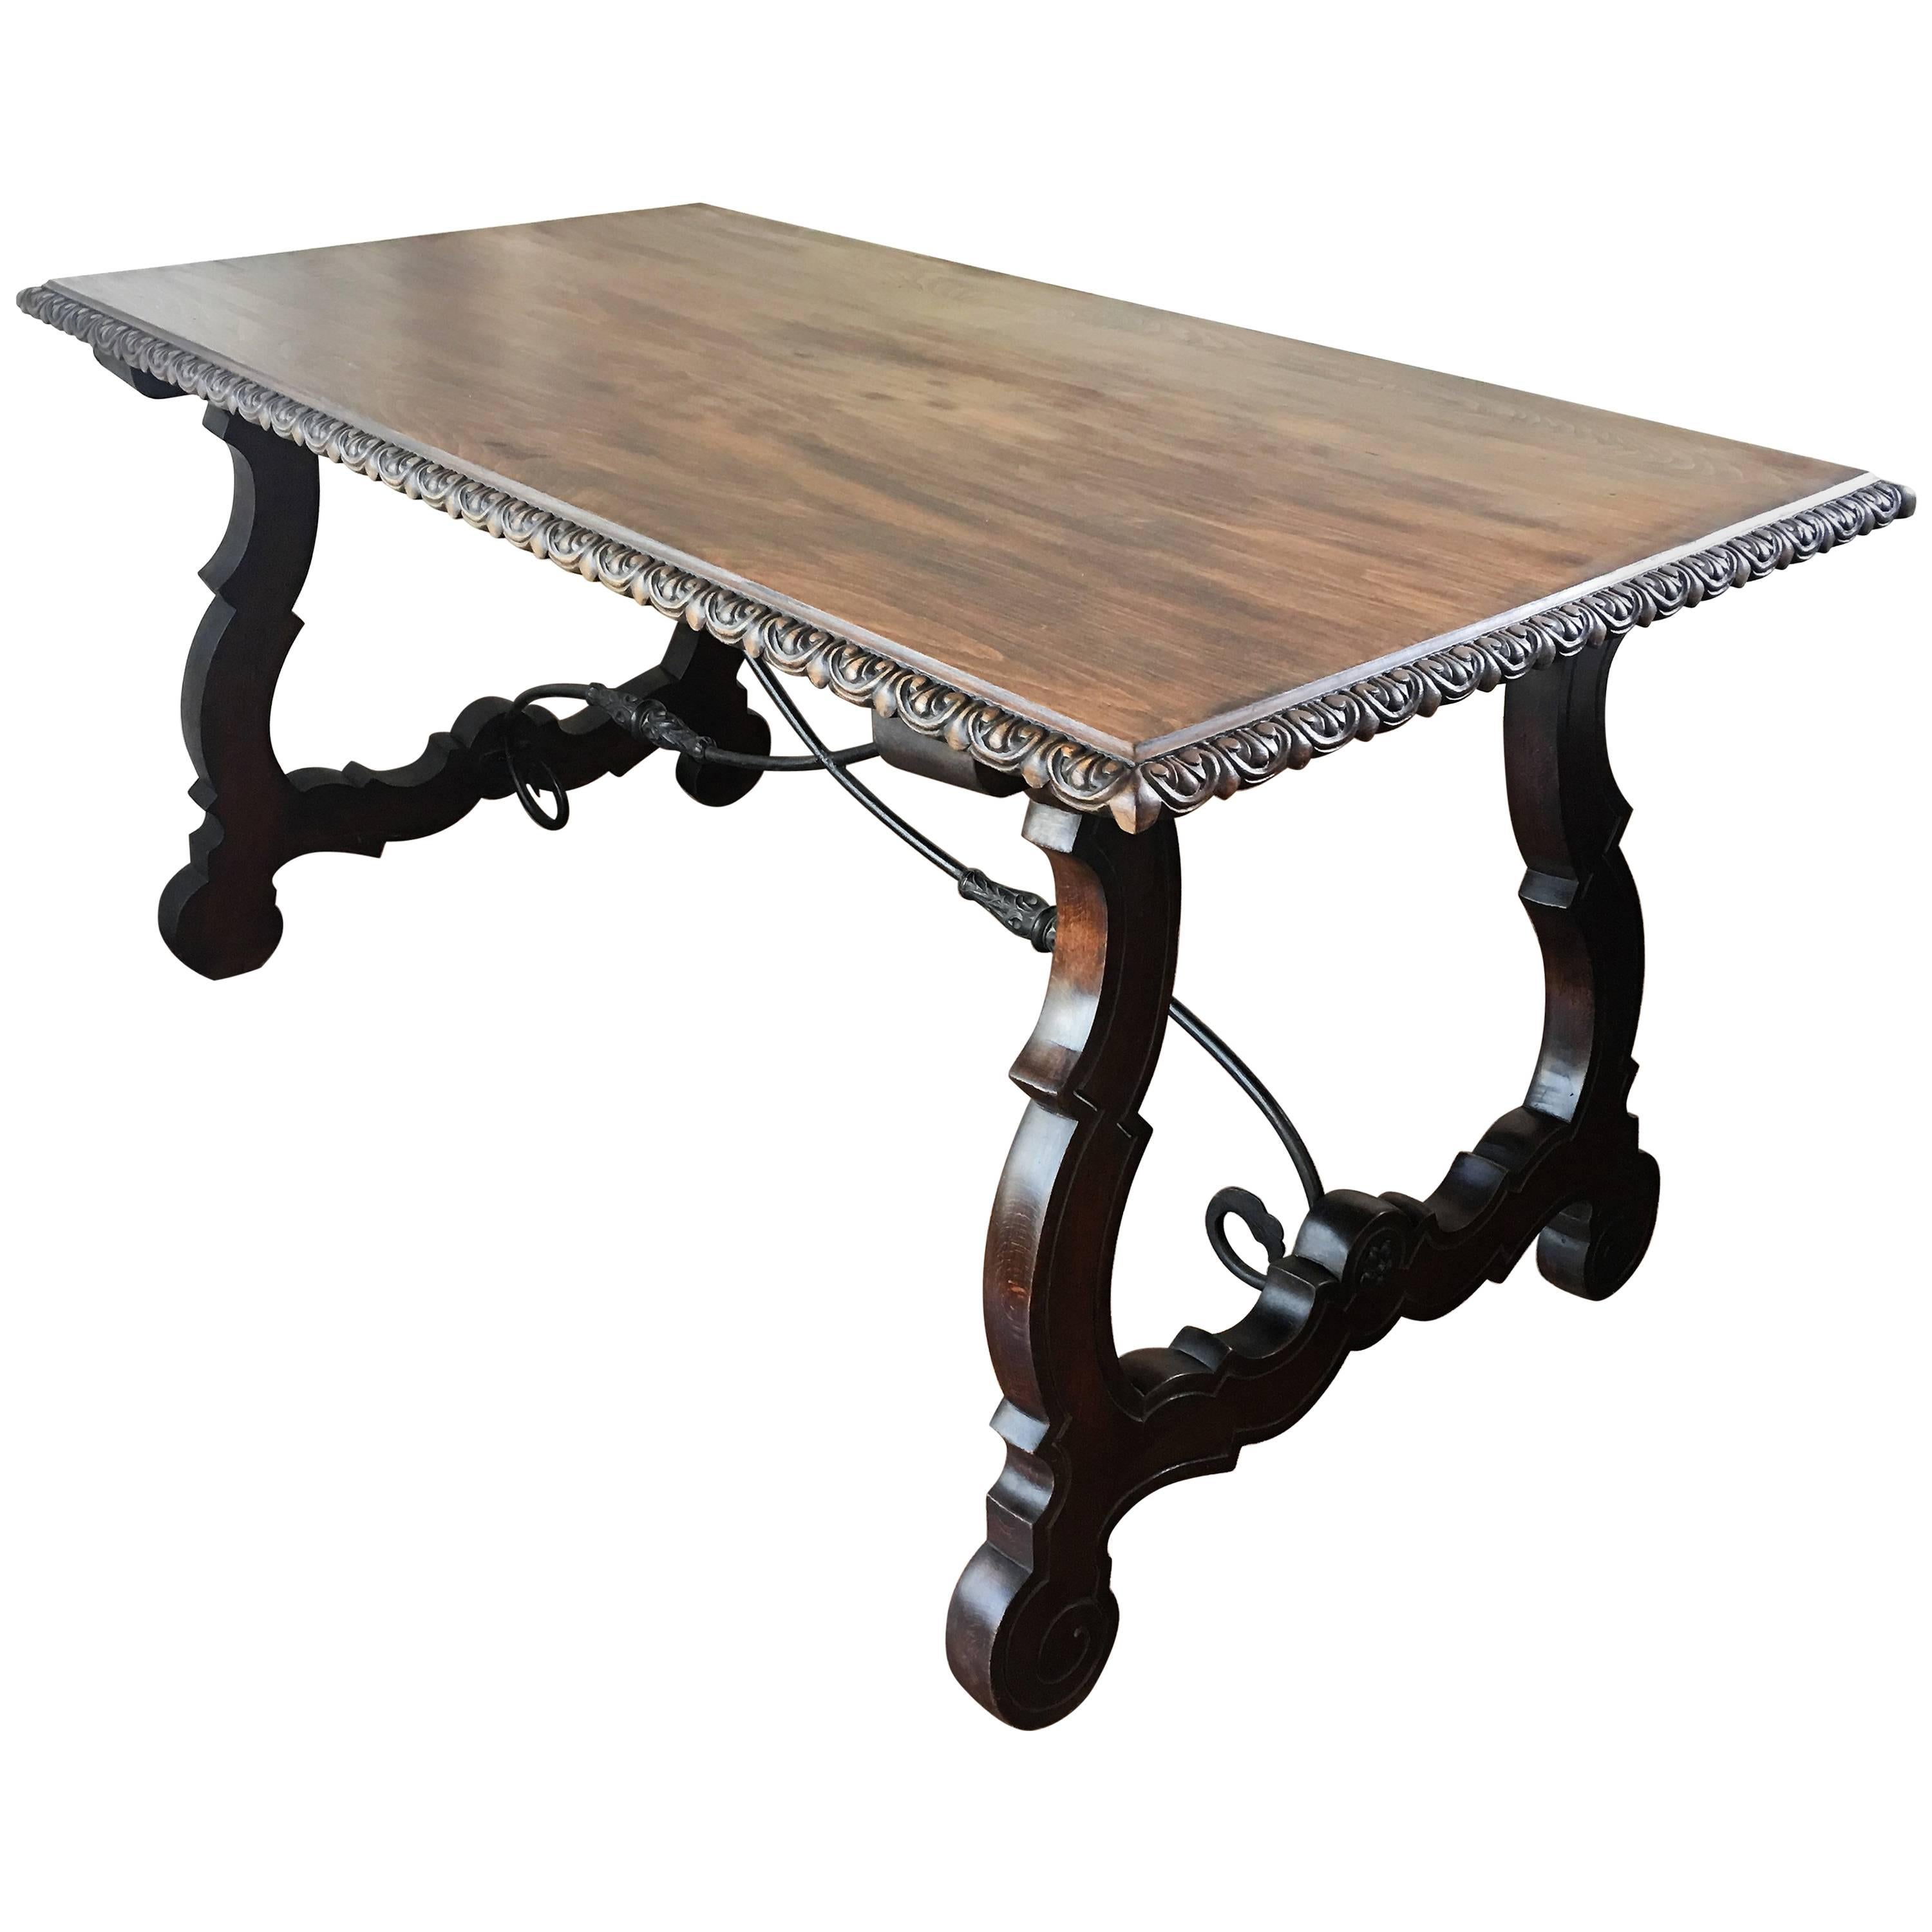 19th Century Trestle Farm Table with Lyre Legs and Iron Stretcher